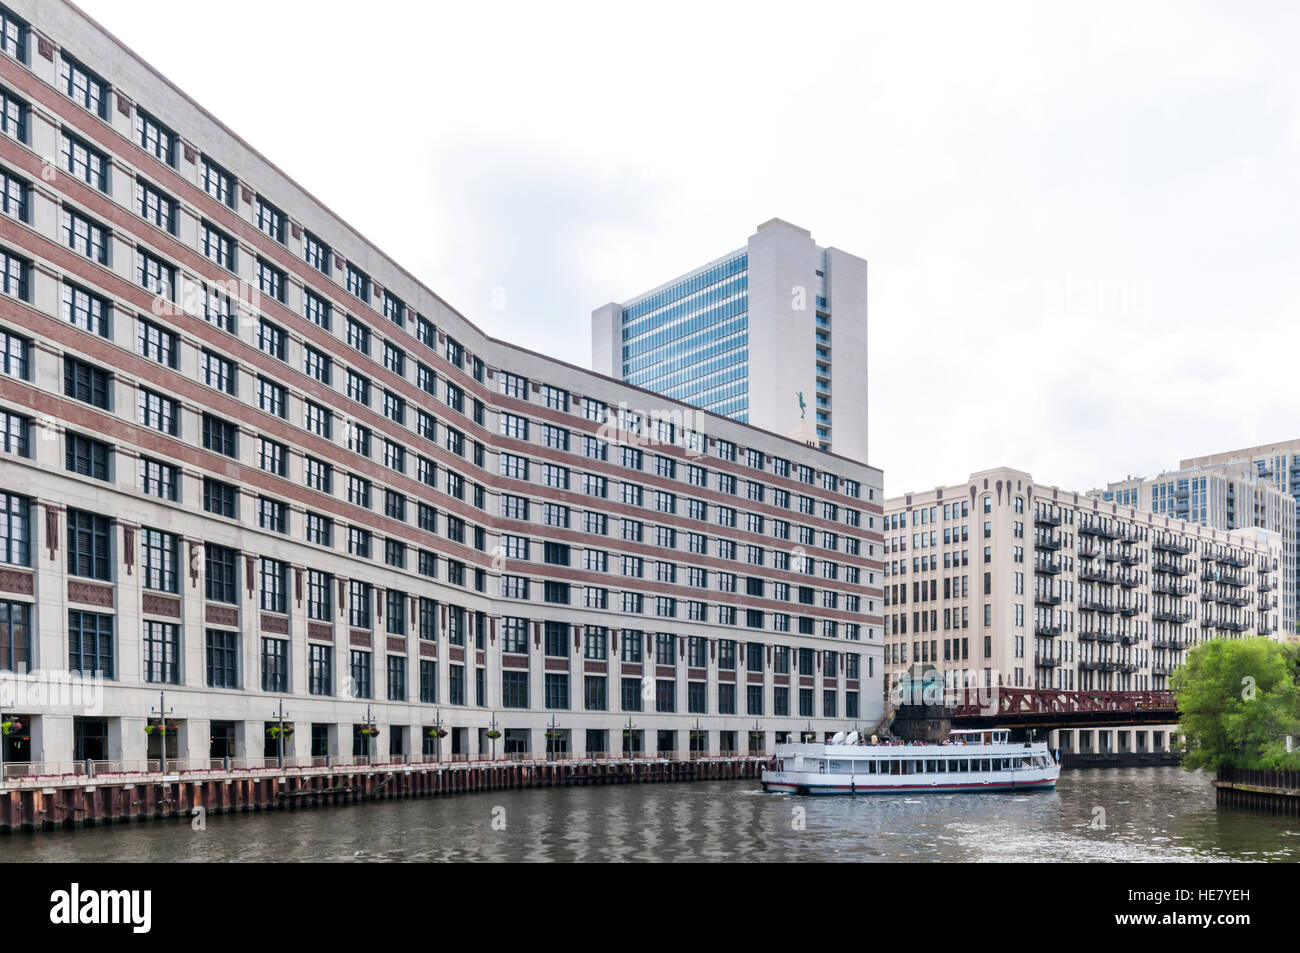 Catalog House on the north branch of the Chicago River. Built in 1908 it was originally the HQ of Montgomery Ward and now houses Groupon Stock Photo